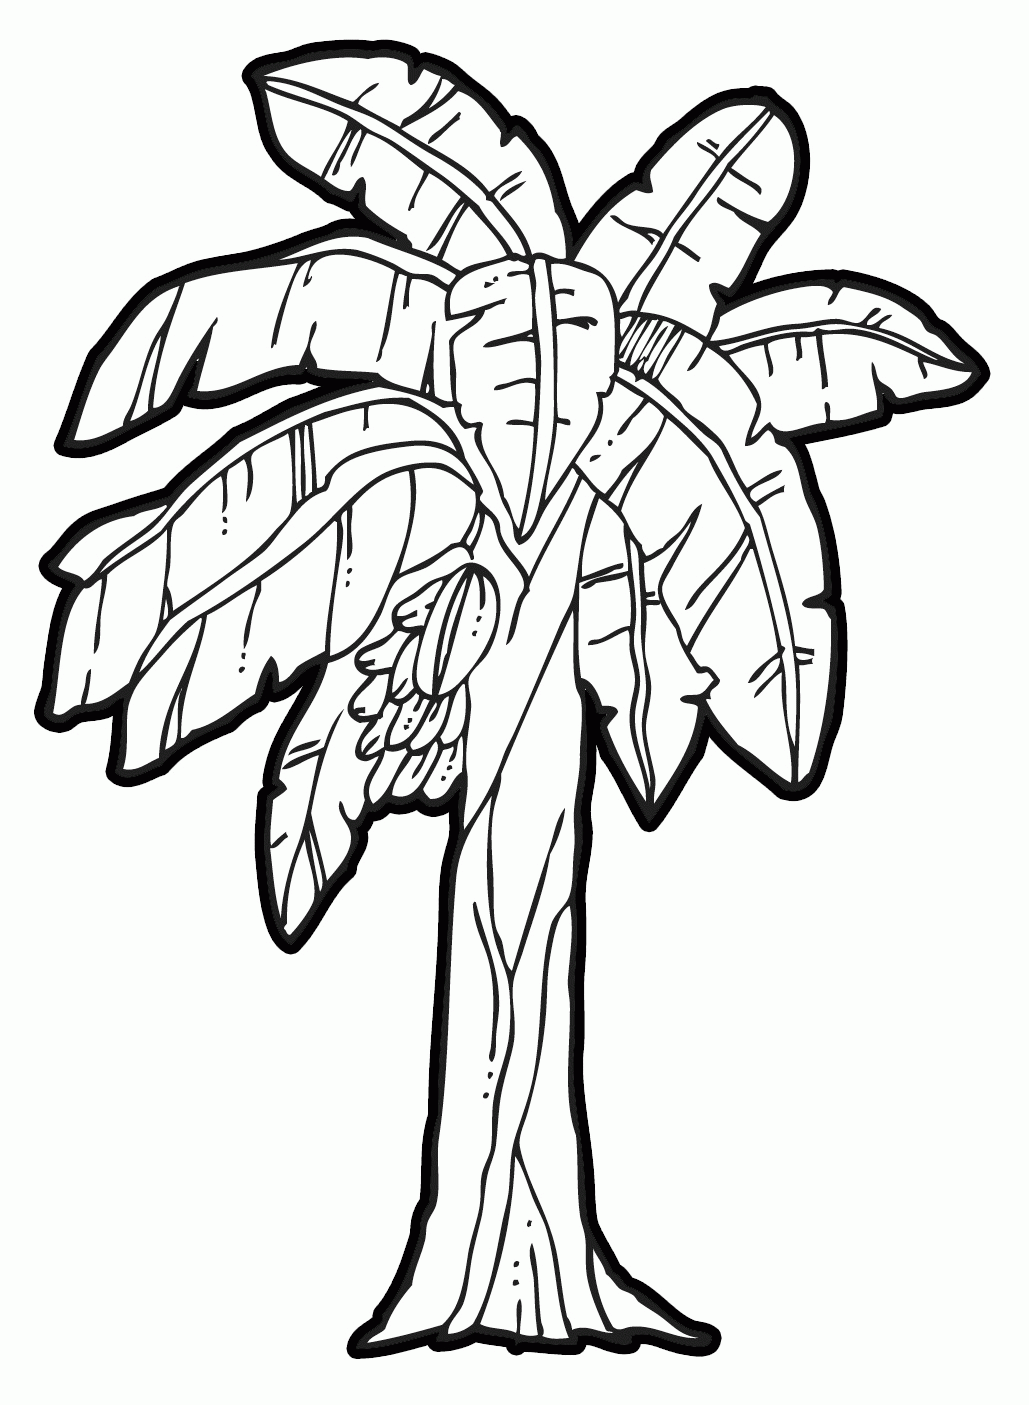 Banana Tree Coloring Sheet - High Quality Coloring Pages